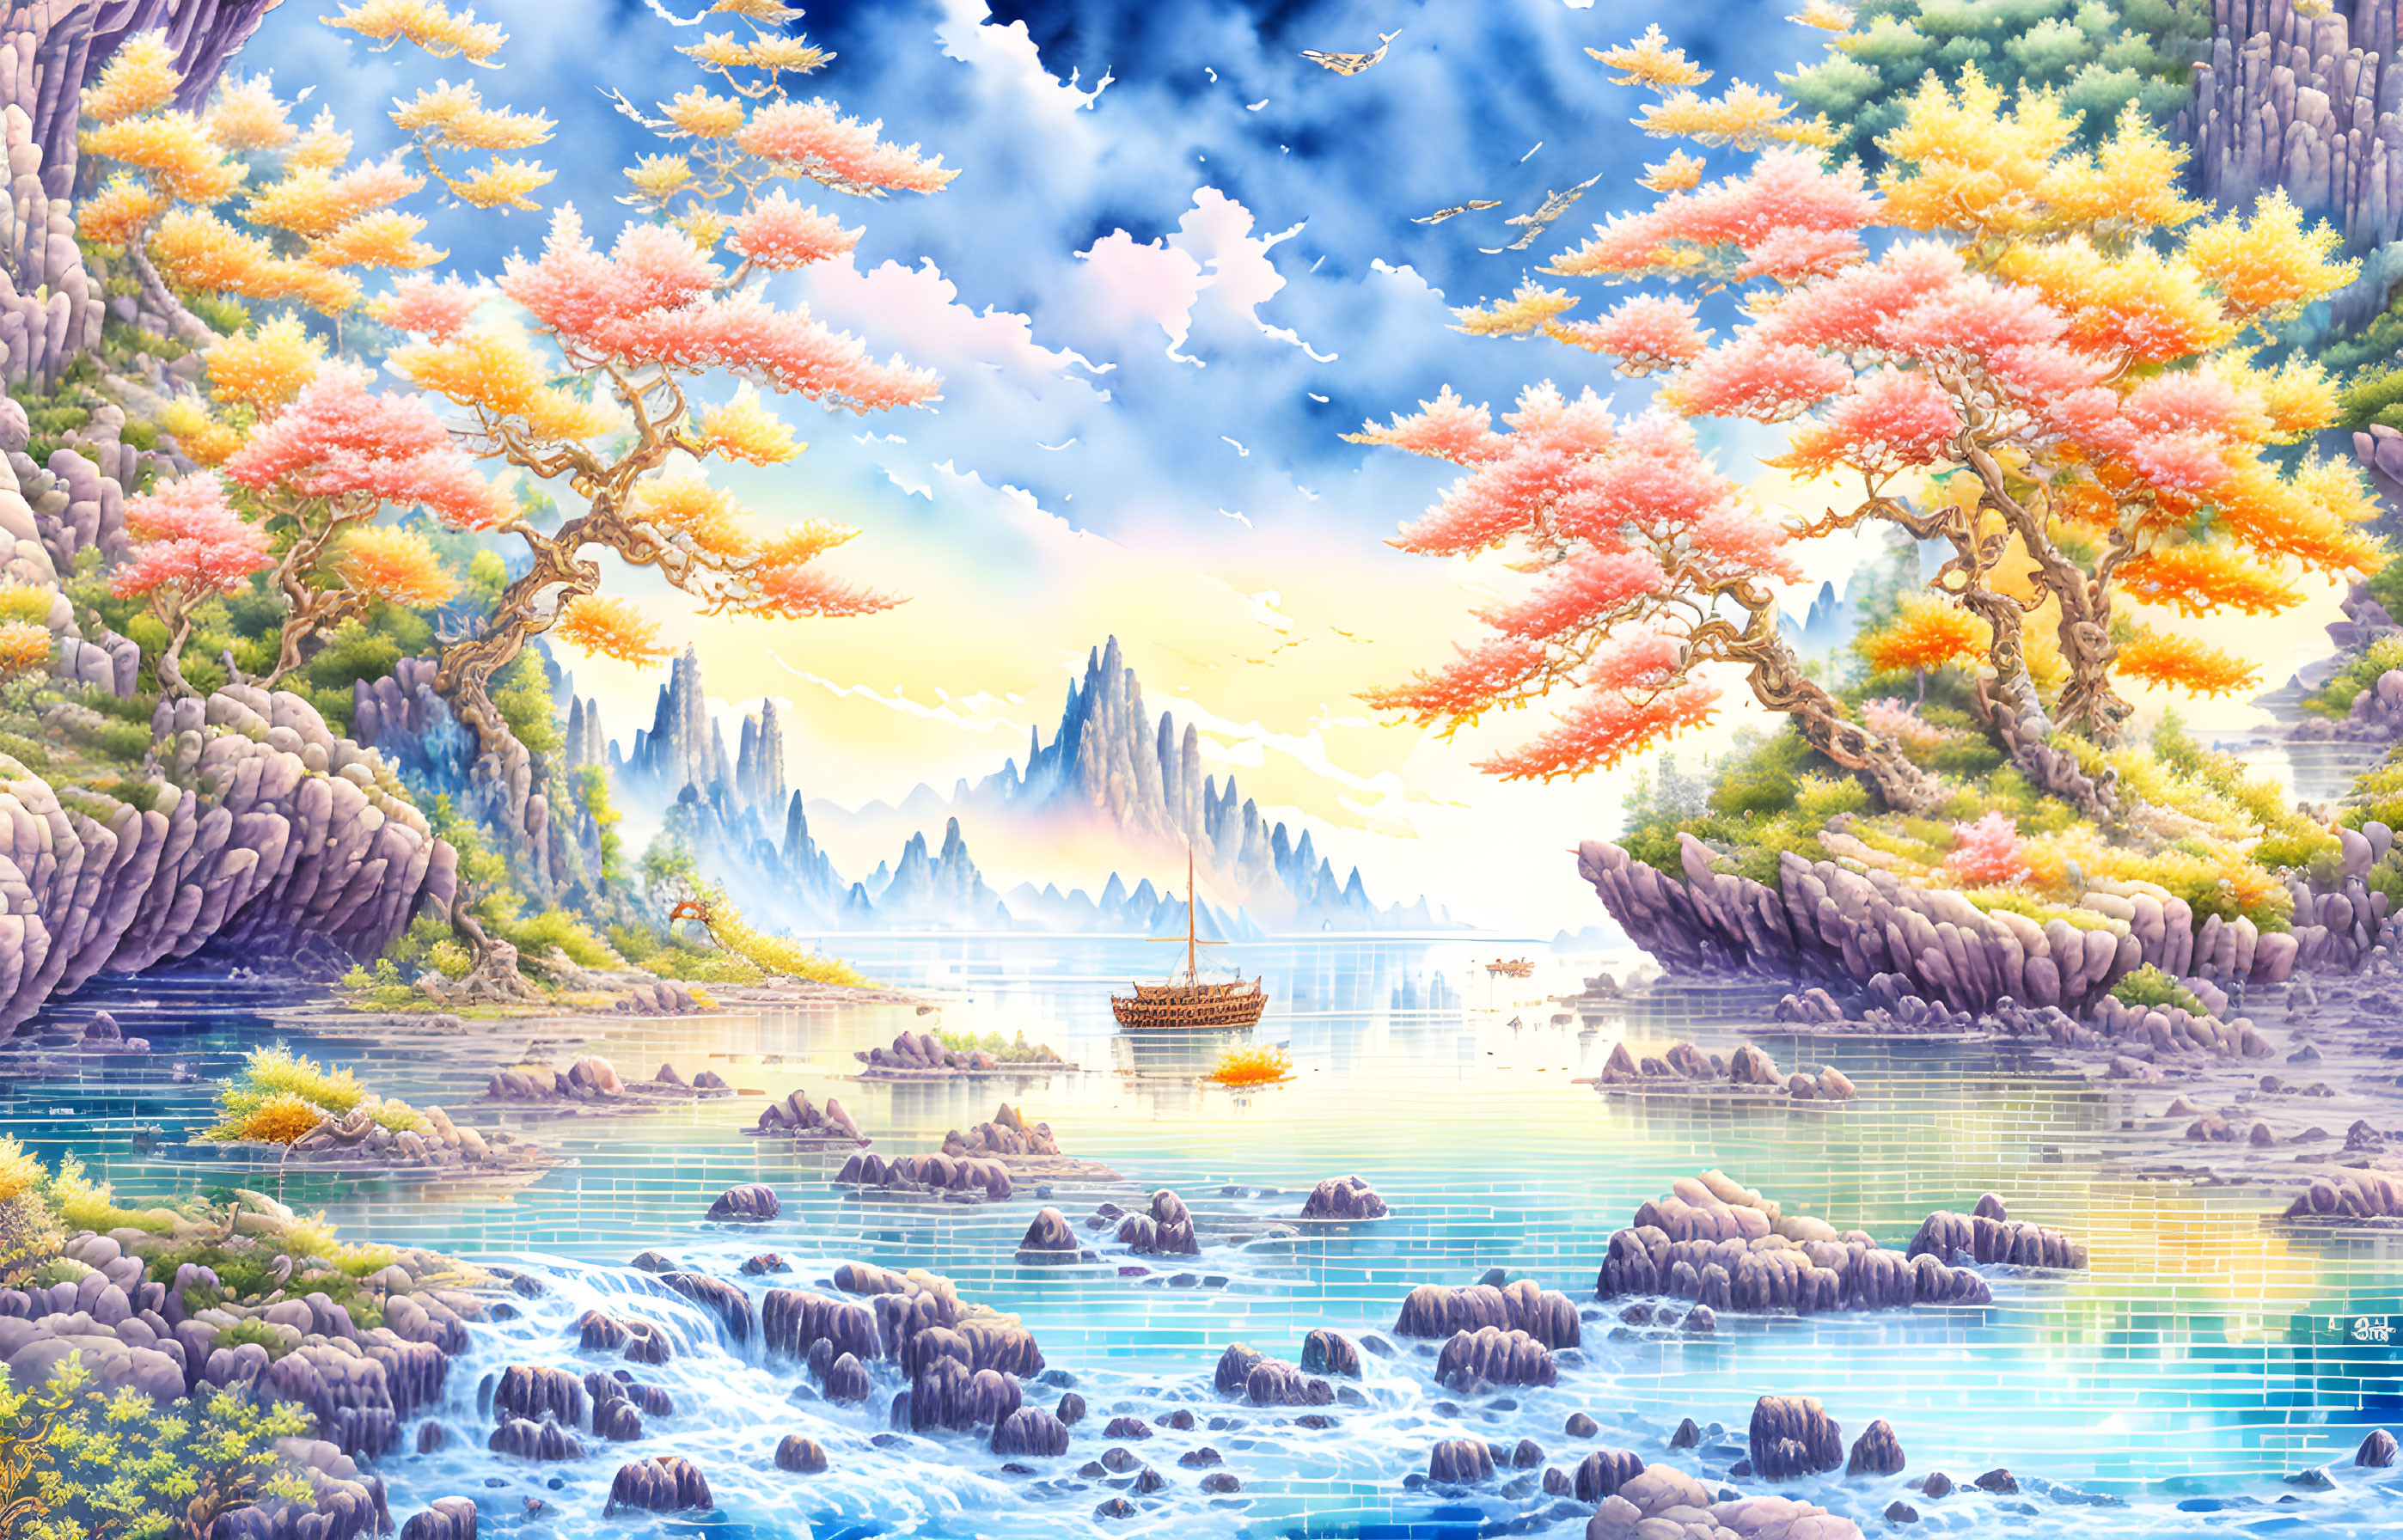 Pastel Dreams: Tranquil Waterscape